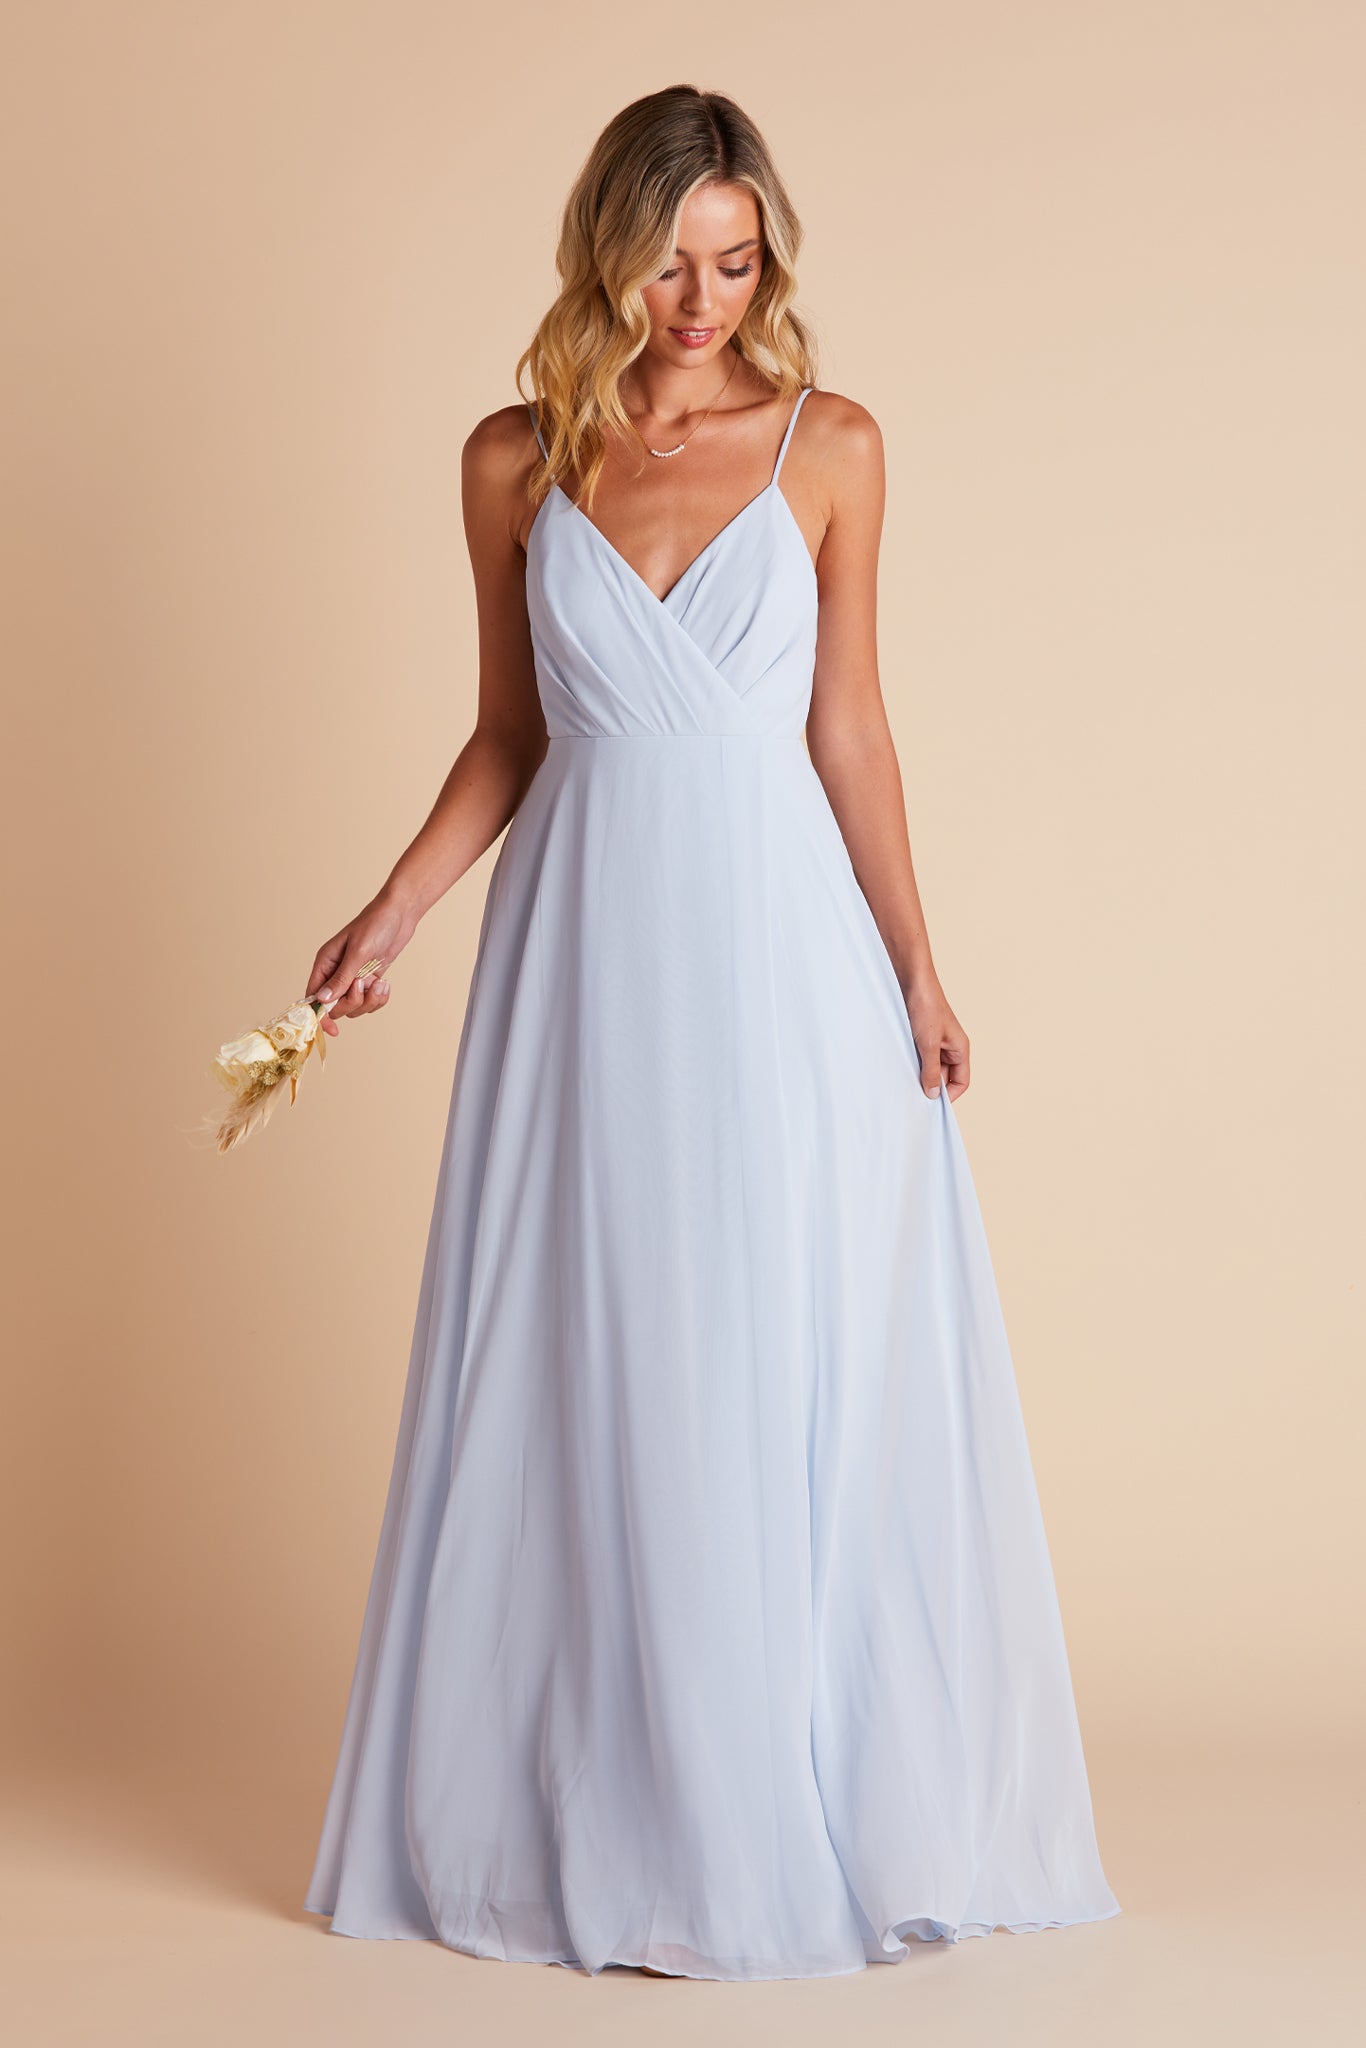 Kaia bridesmaids dress in ice blue chiffon by Birdy Grey, front view